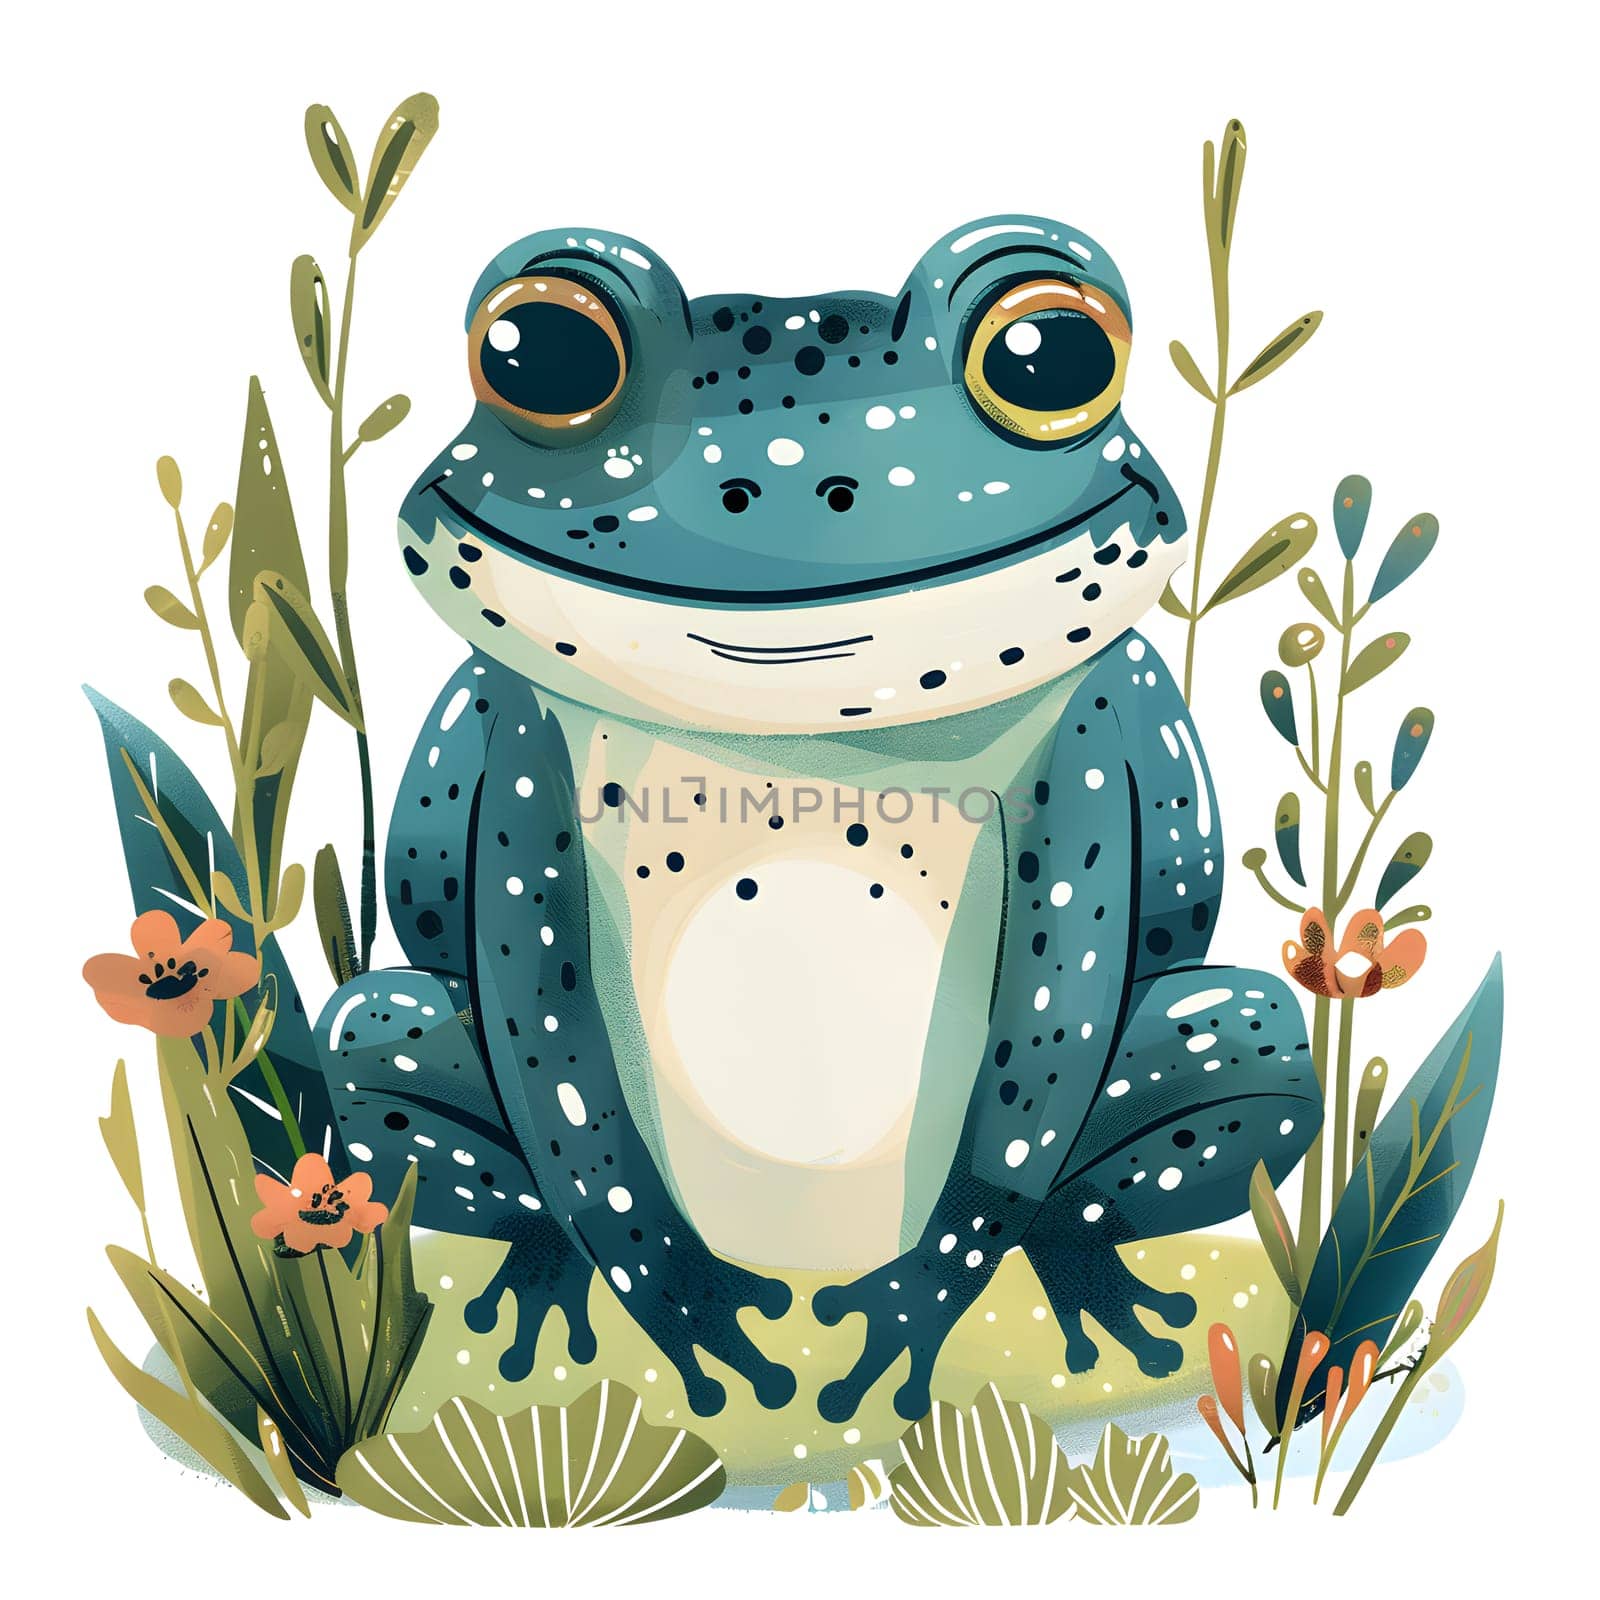 A True frog, an amphibian organism, is sitting in the grass surrounded by plants and flowers, creating a picturesque scene resembling an art painting